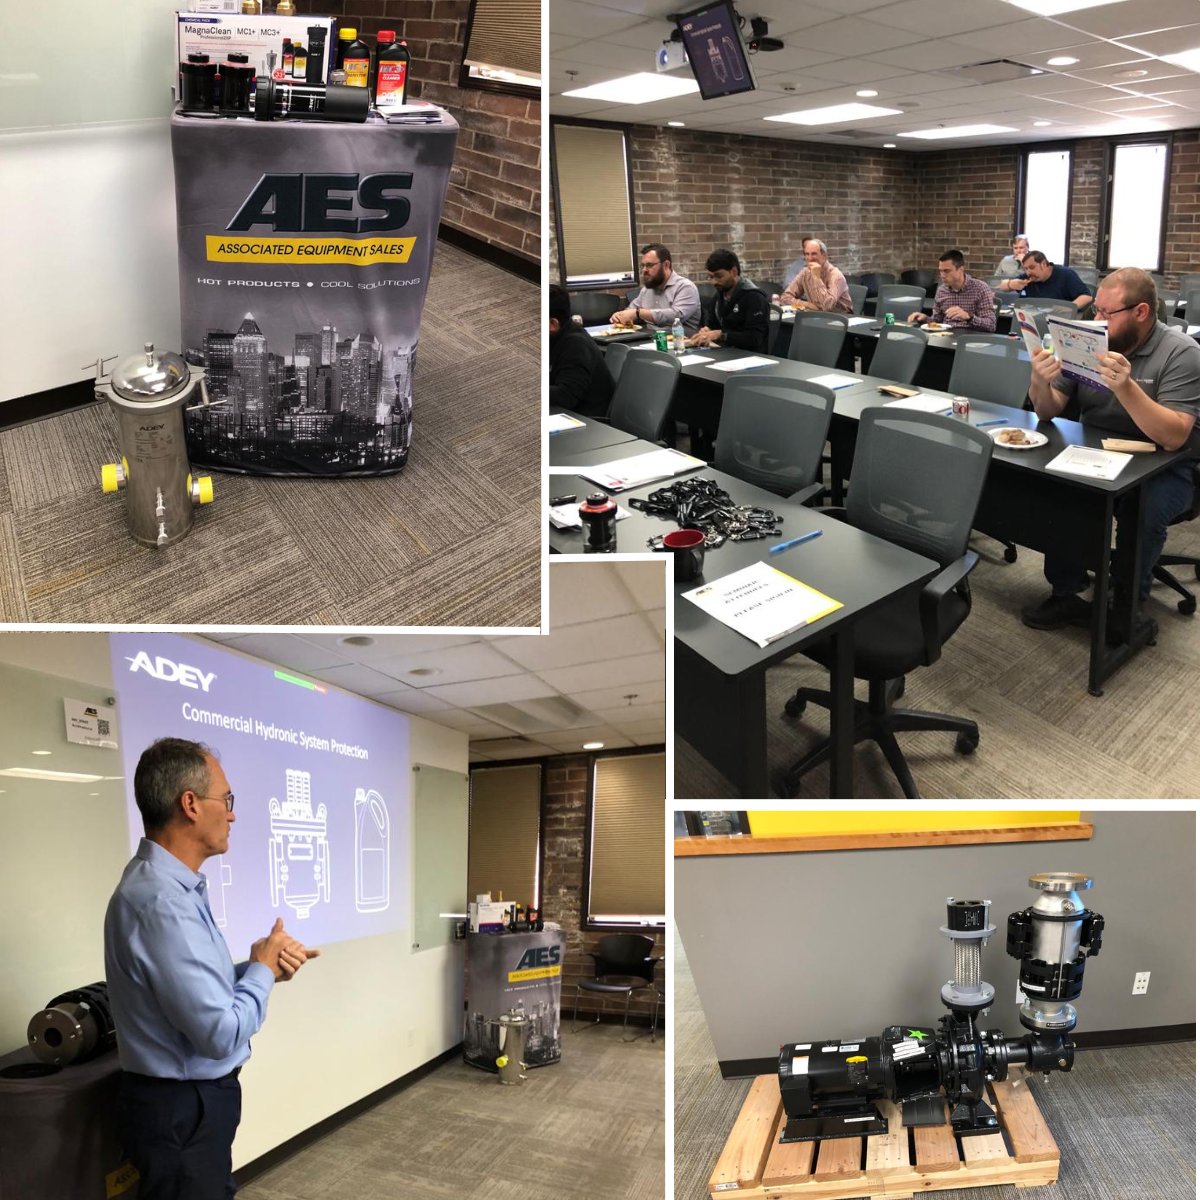 A special thanks to AES, our newly appointed Rep for Kansas and Missouri for introducing our VP of Sales to a lovely group of engineers and mechanical contractors.

#training #learningisearning #manufacturersrep #contractorsofkansas #contractorsofmissouri #mechanicalengineers